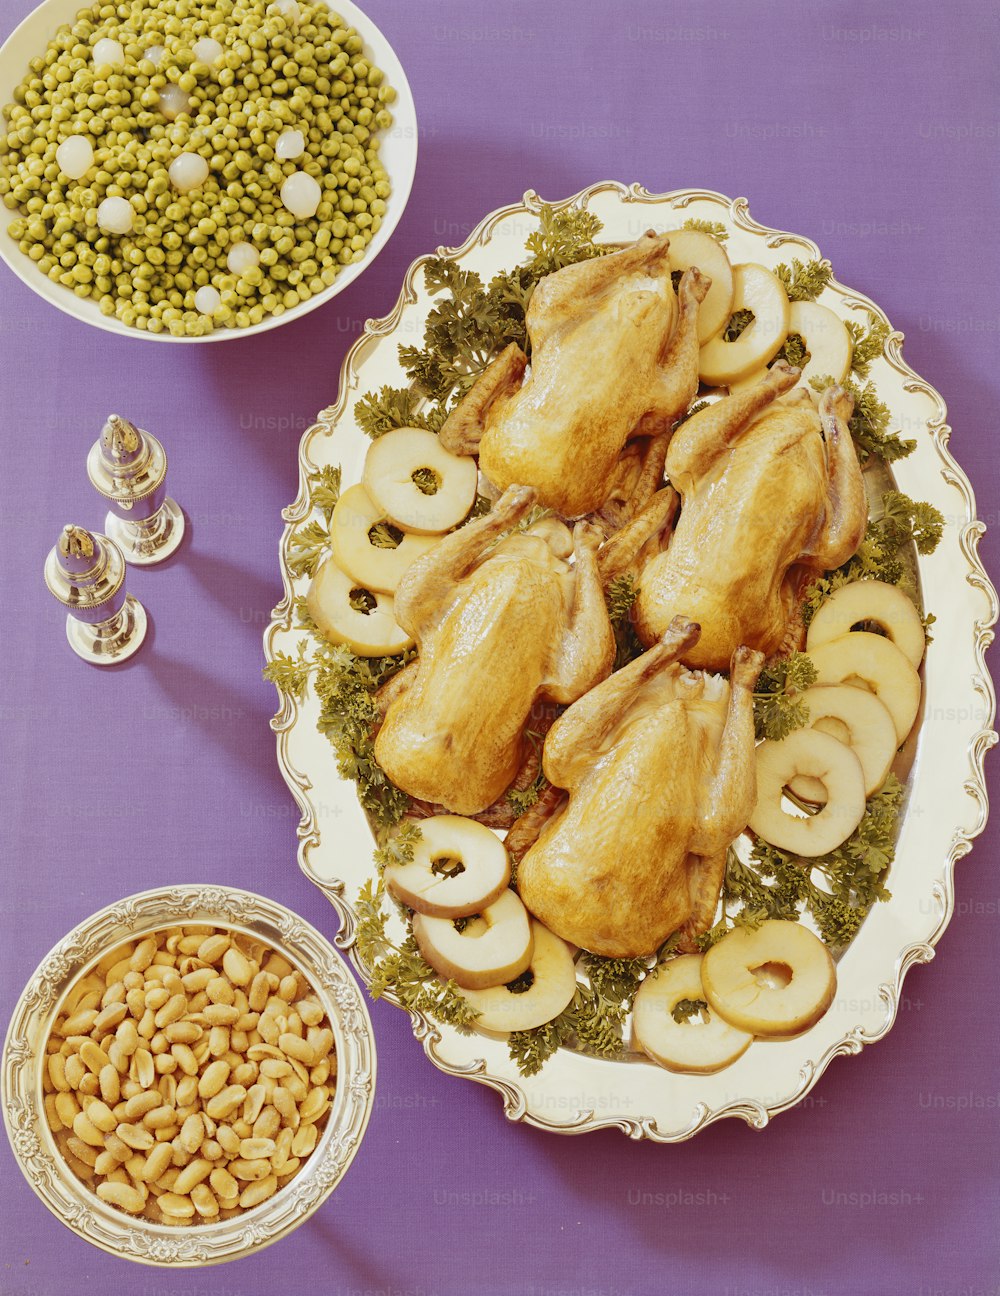 a platter of chicken, mushrooms, peas, and peas on a purple table